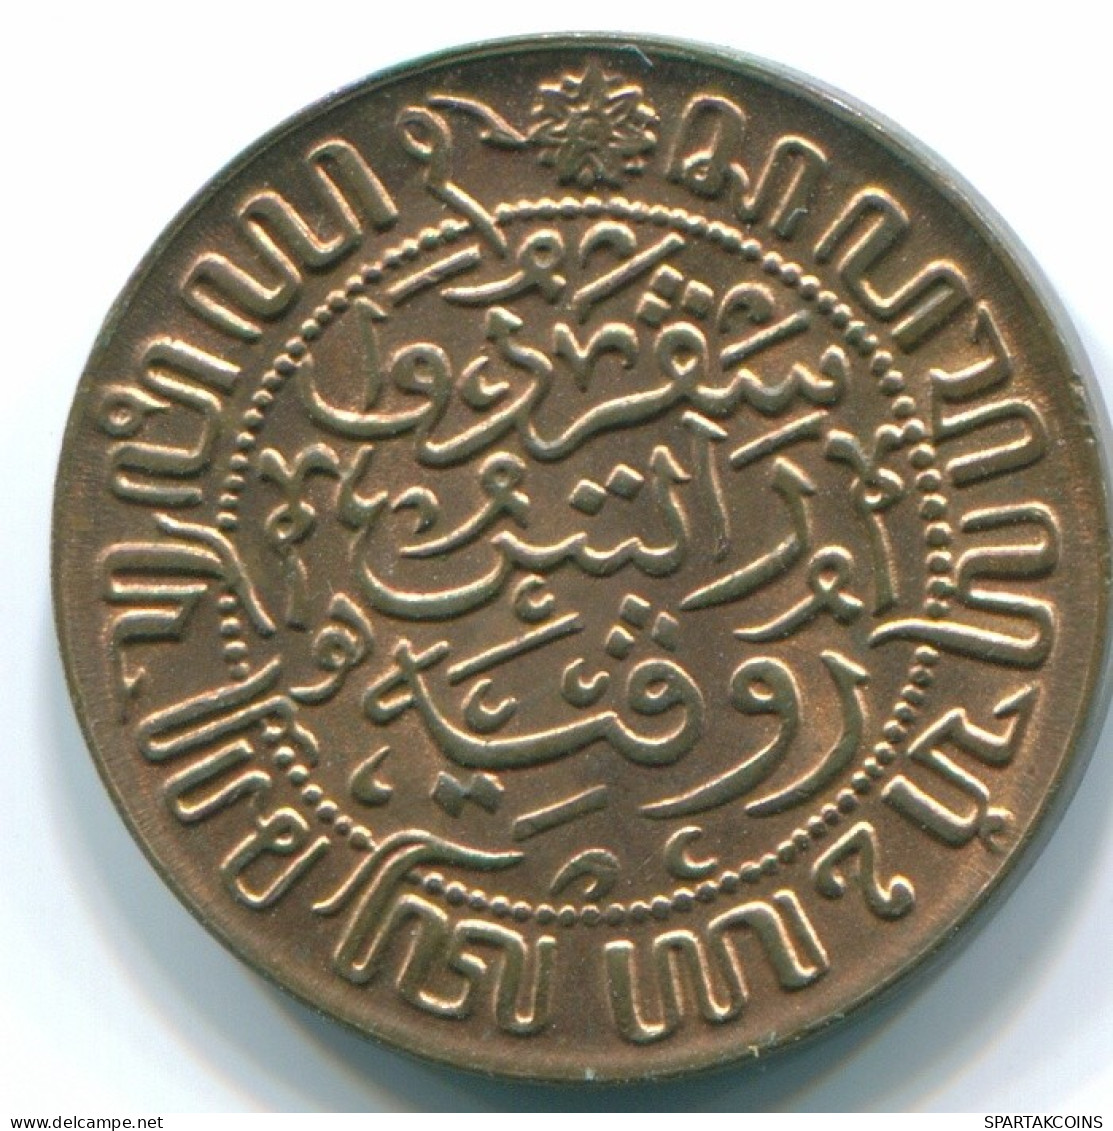 1/2 CENT 1945 NETHERLANDS EAST INDIES INDONESIA Bronze Colonial Coin #S13102.U.A - Indes Néerlandaises